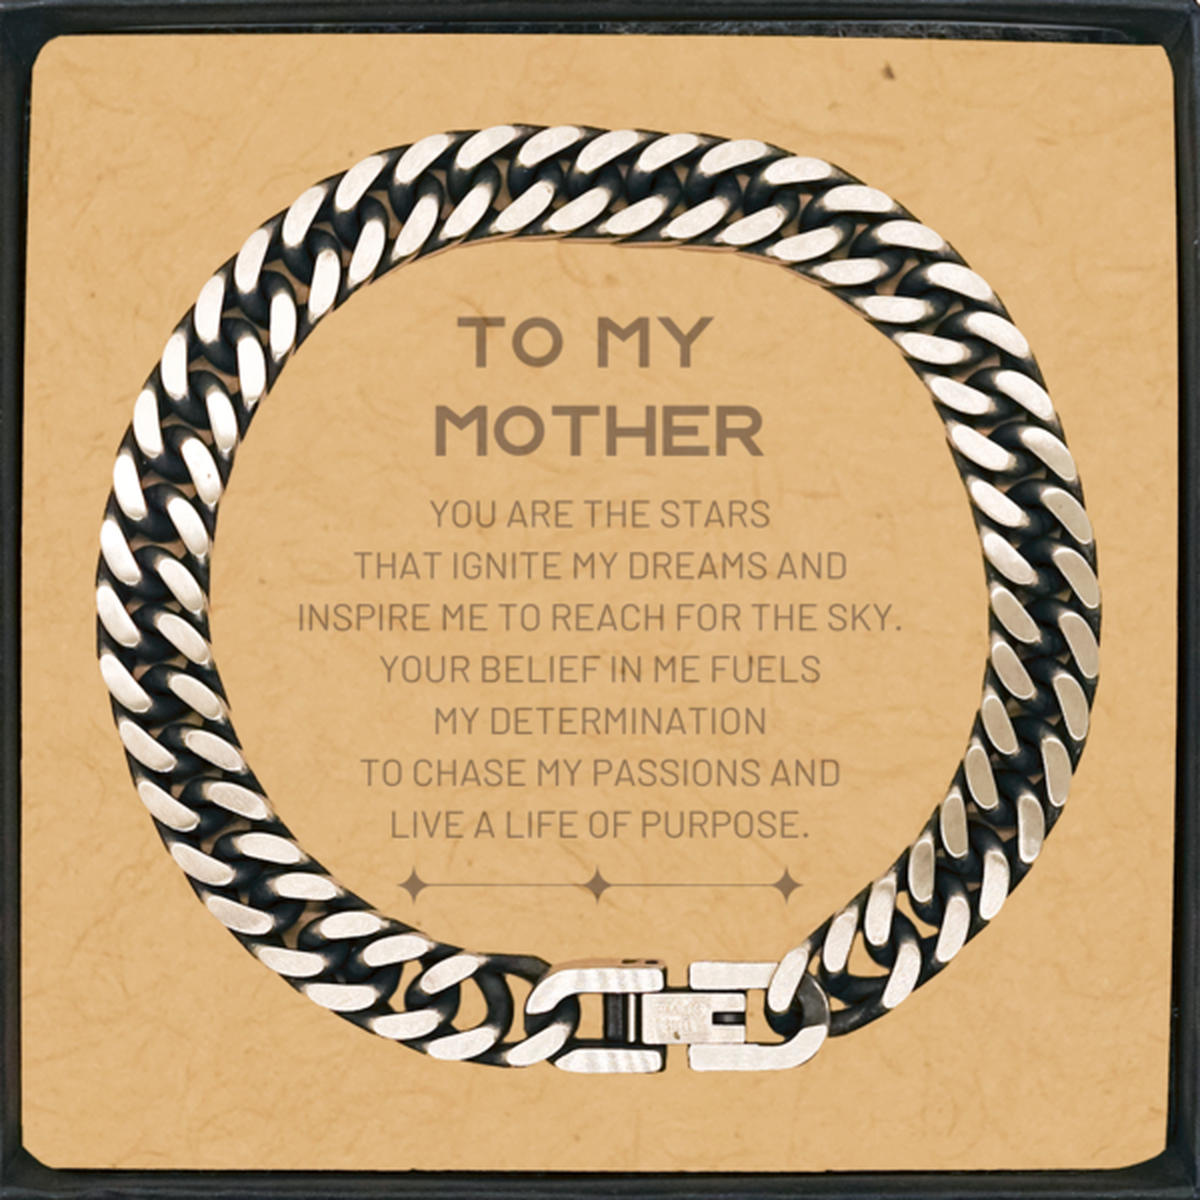 To My Mother Cuban Link Chain Bracelet, You are the stars that ignite my dreams and inspire me to reach for the sky, Birthday Unique Gifts For Mother, Thank You Gifts For Mother